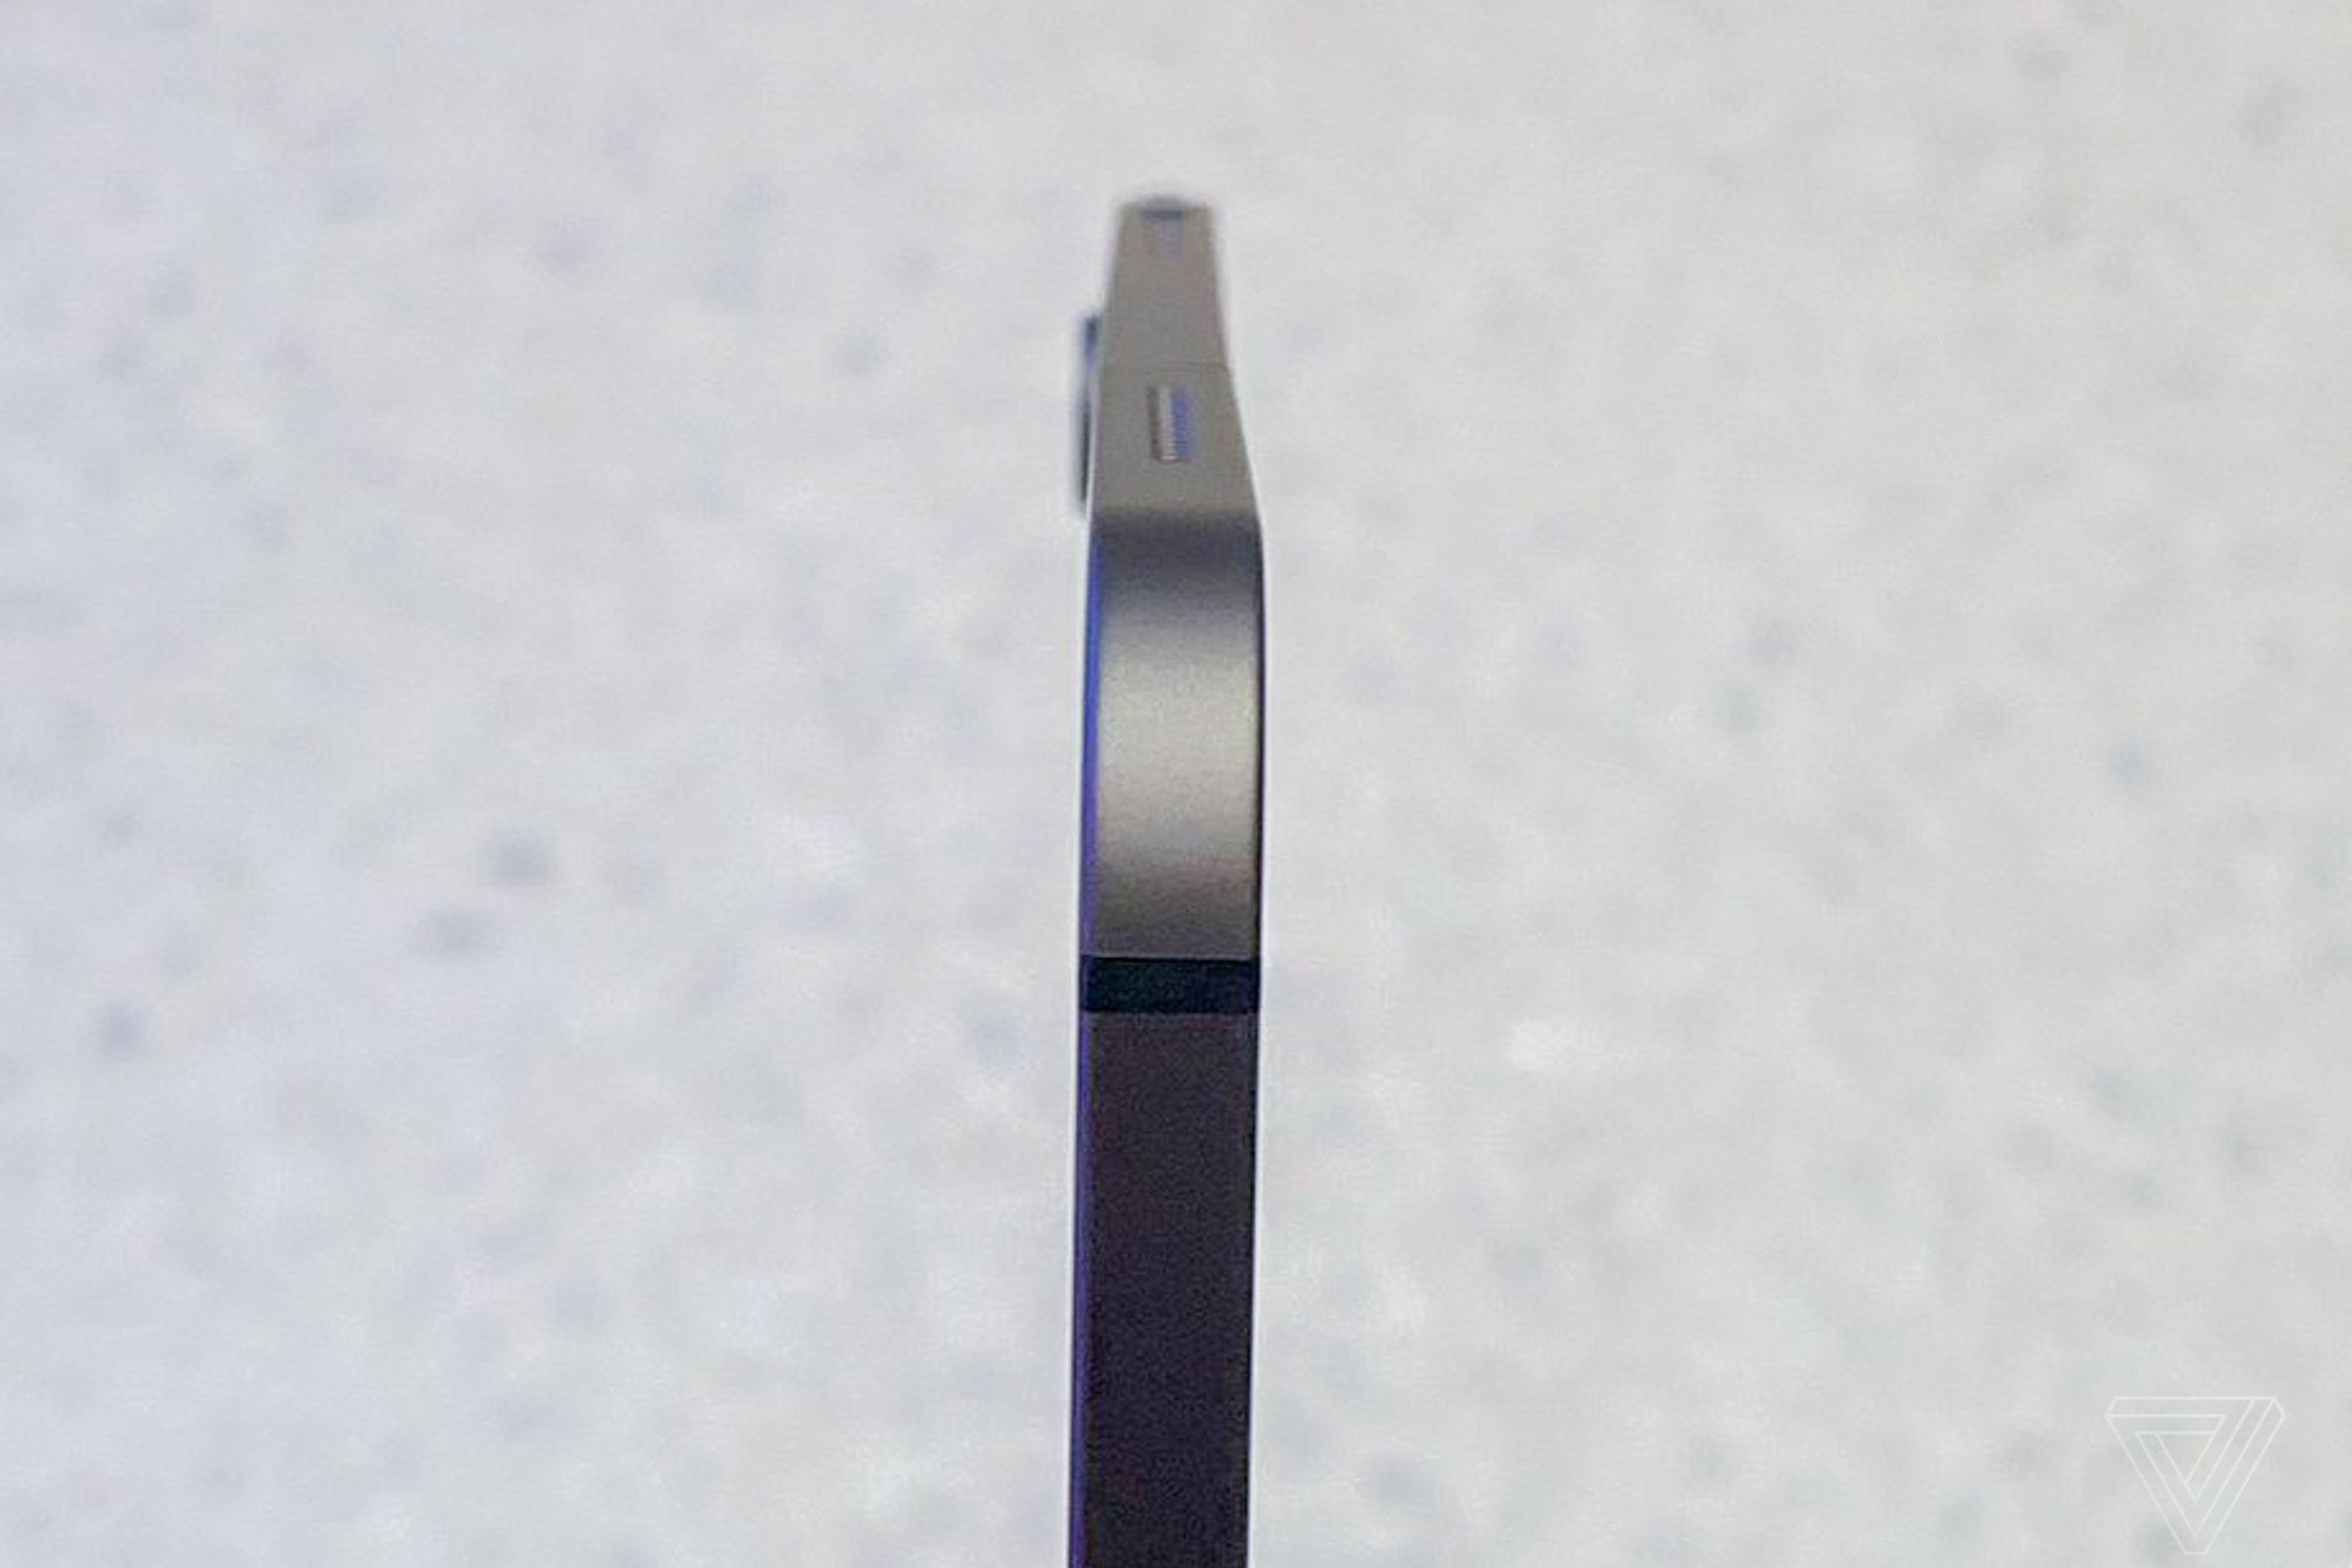 An example of a bend in a fresh-out-of-the-box 2018 iPad Pro.